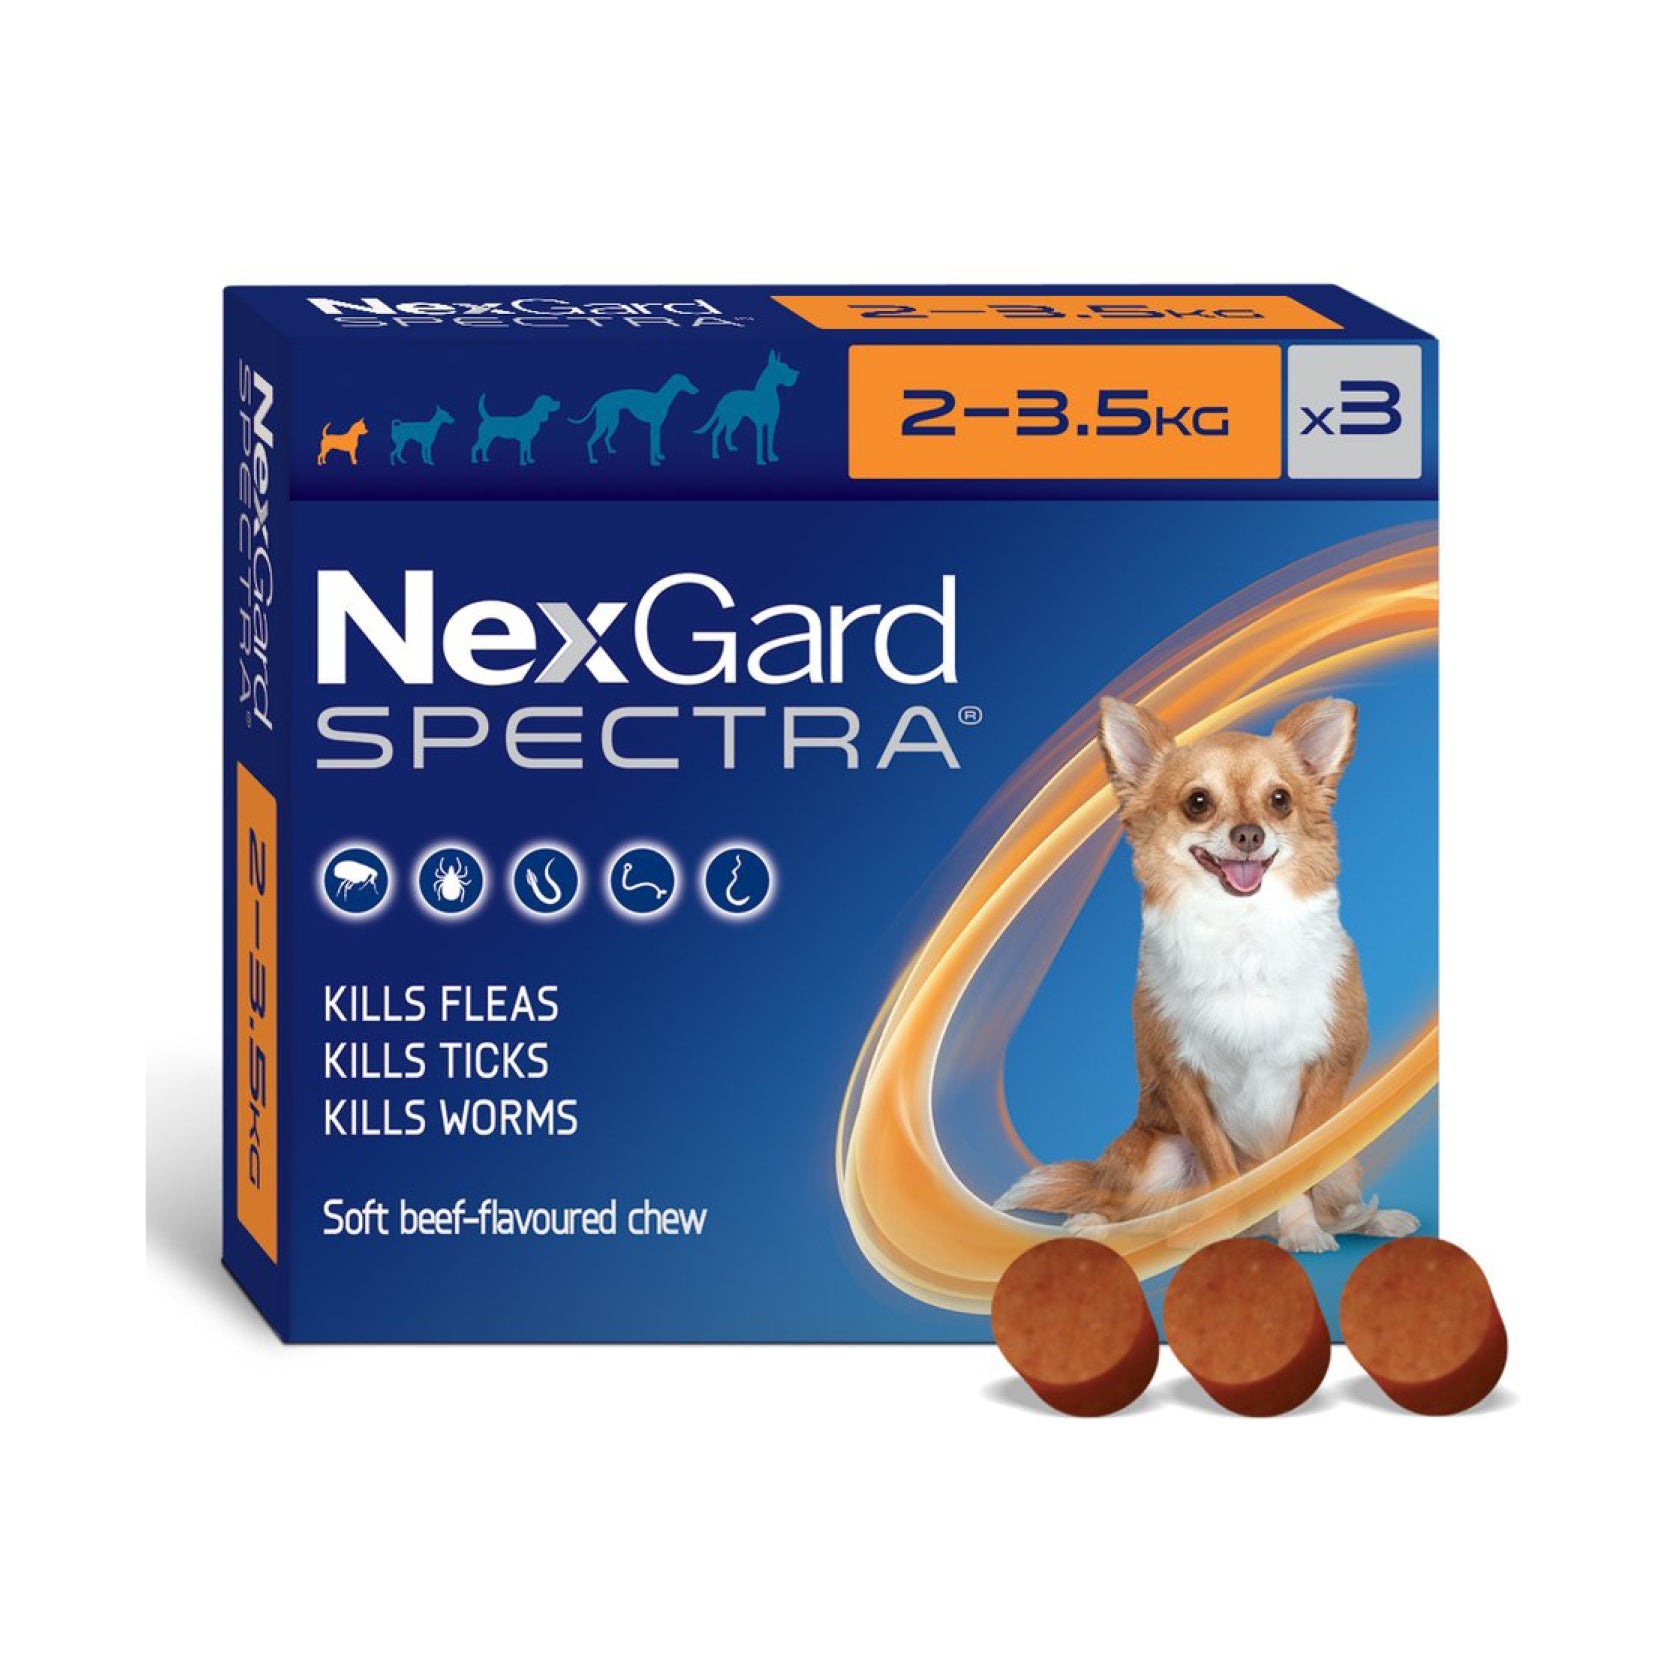 Nexgard Spectra for Extra Small Dogs (2-3.5kg)